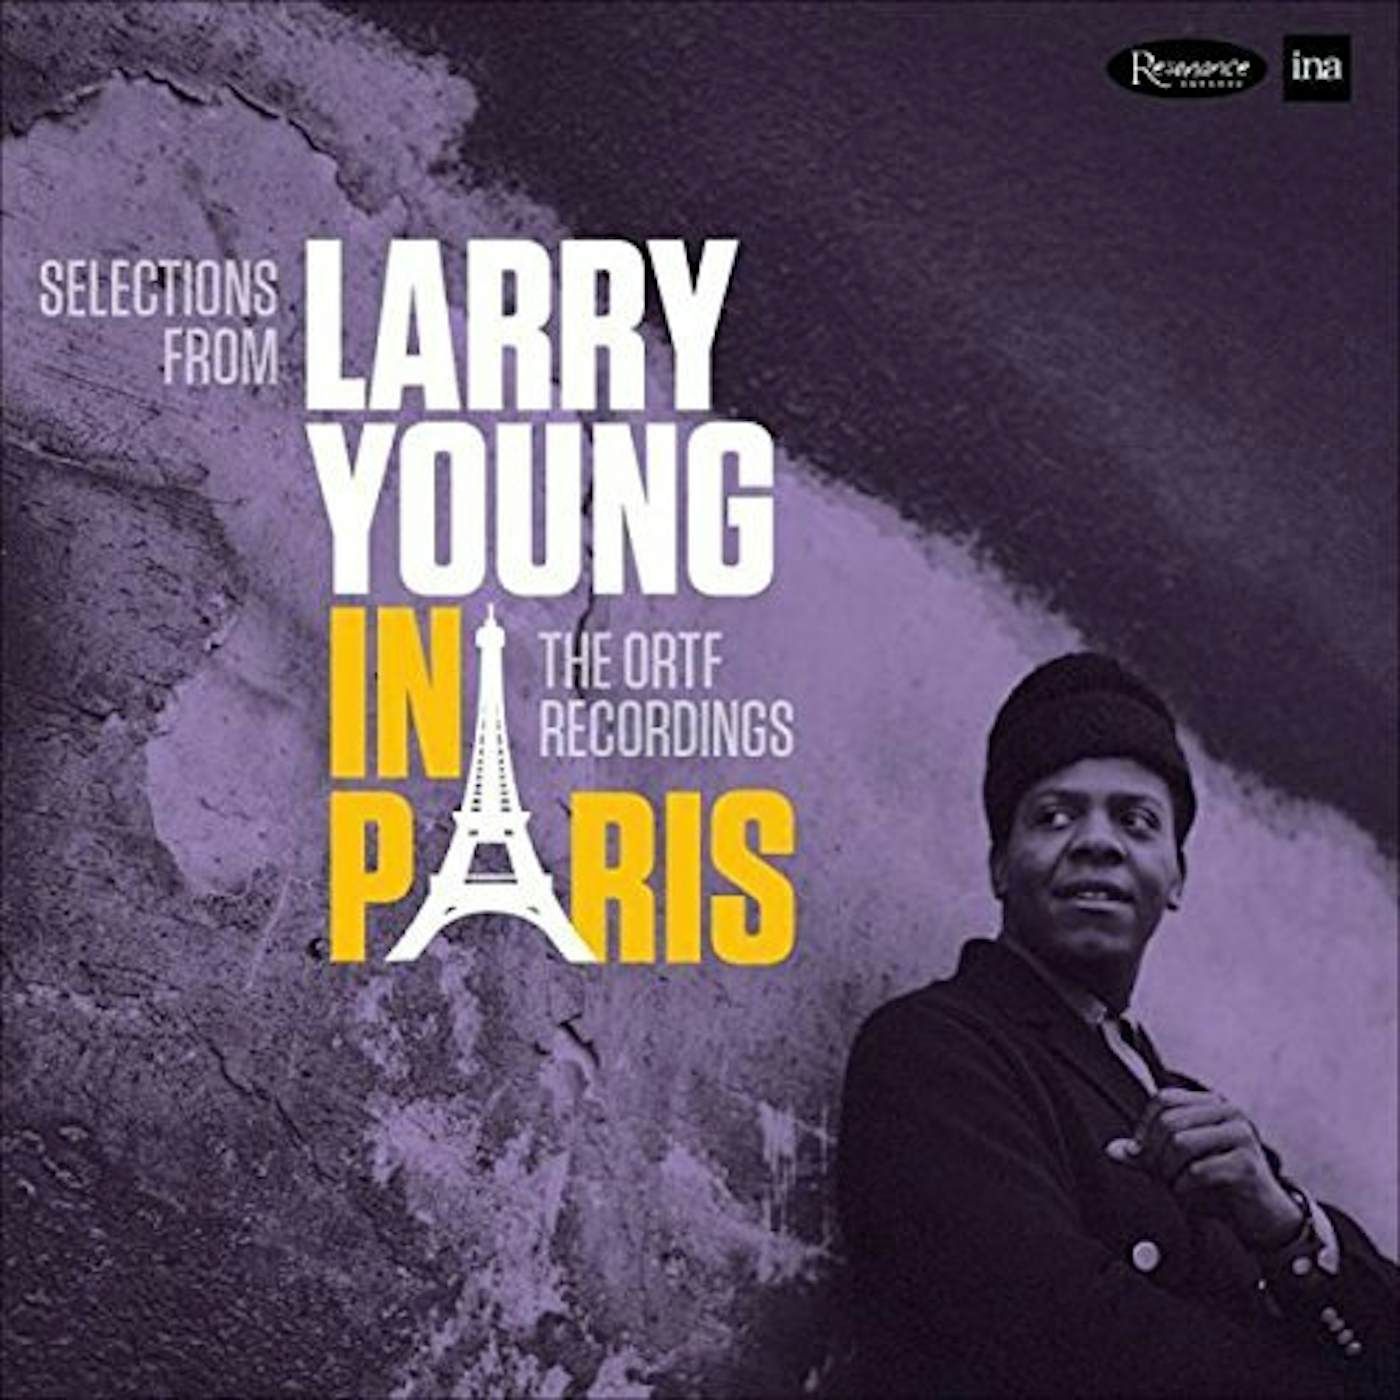 Larry Young IN PARIS: THE ORTF RECORDINGS CD